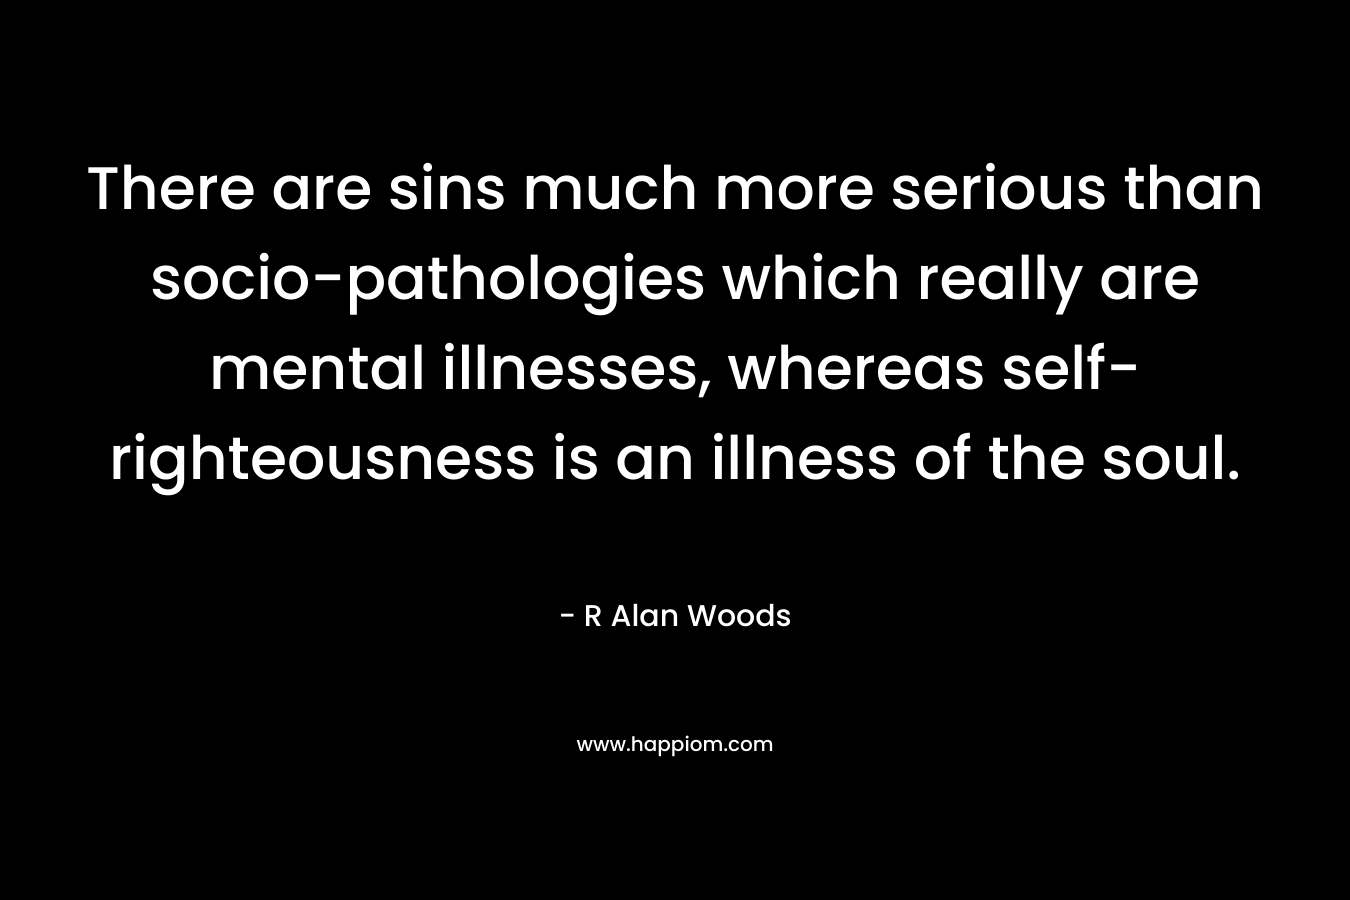 There are sins much more serious than socio-pathologies which really are mental illnesses, whereas self-righteousness is an illness of the soul. – R Alan Woods